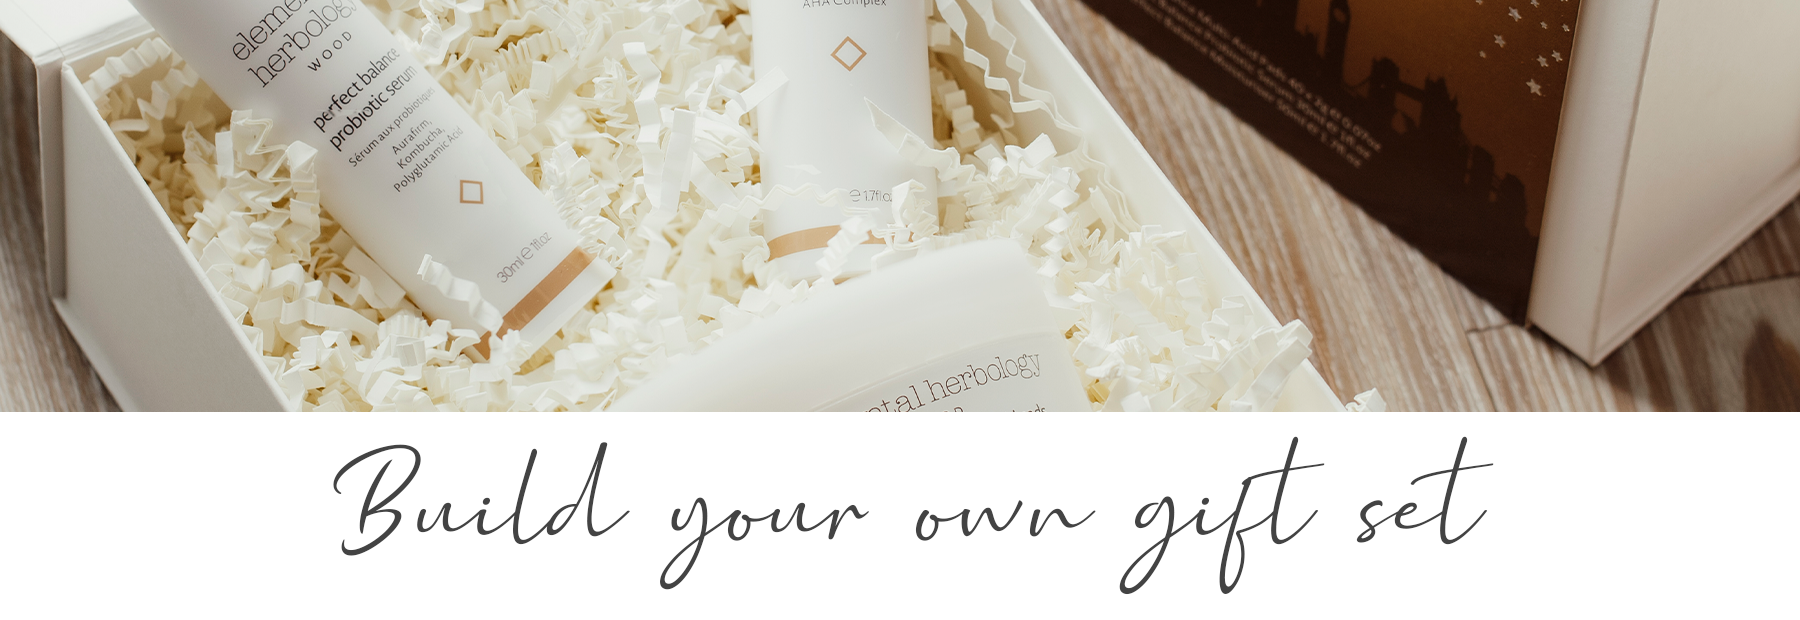 Build Your Own Beauty Gift Set